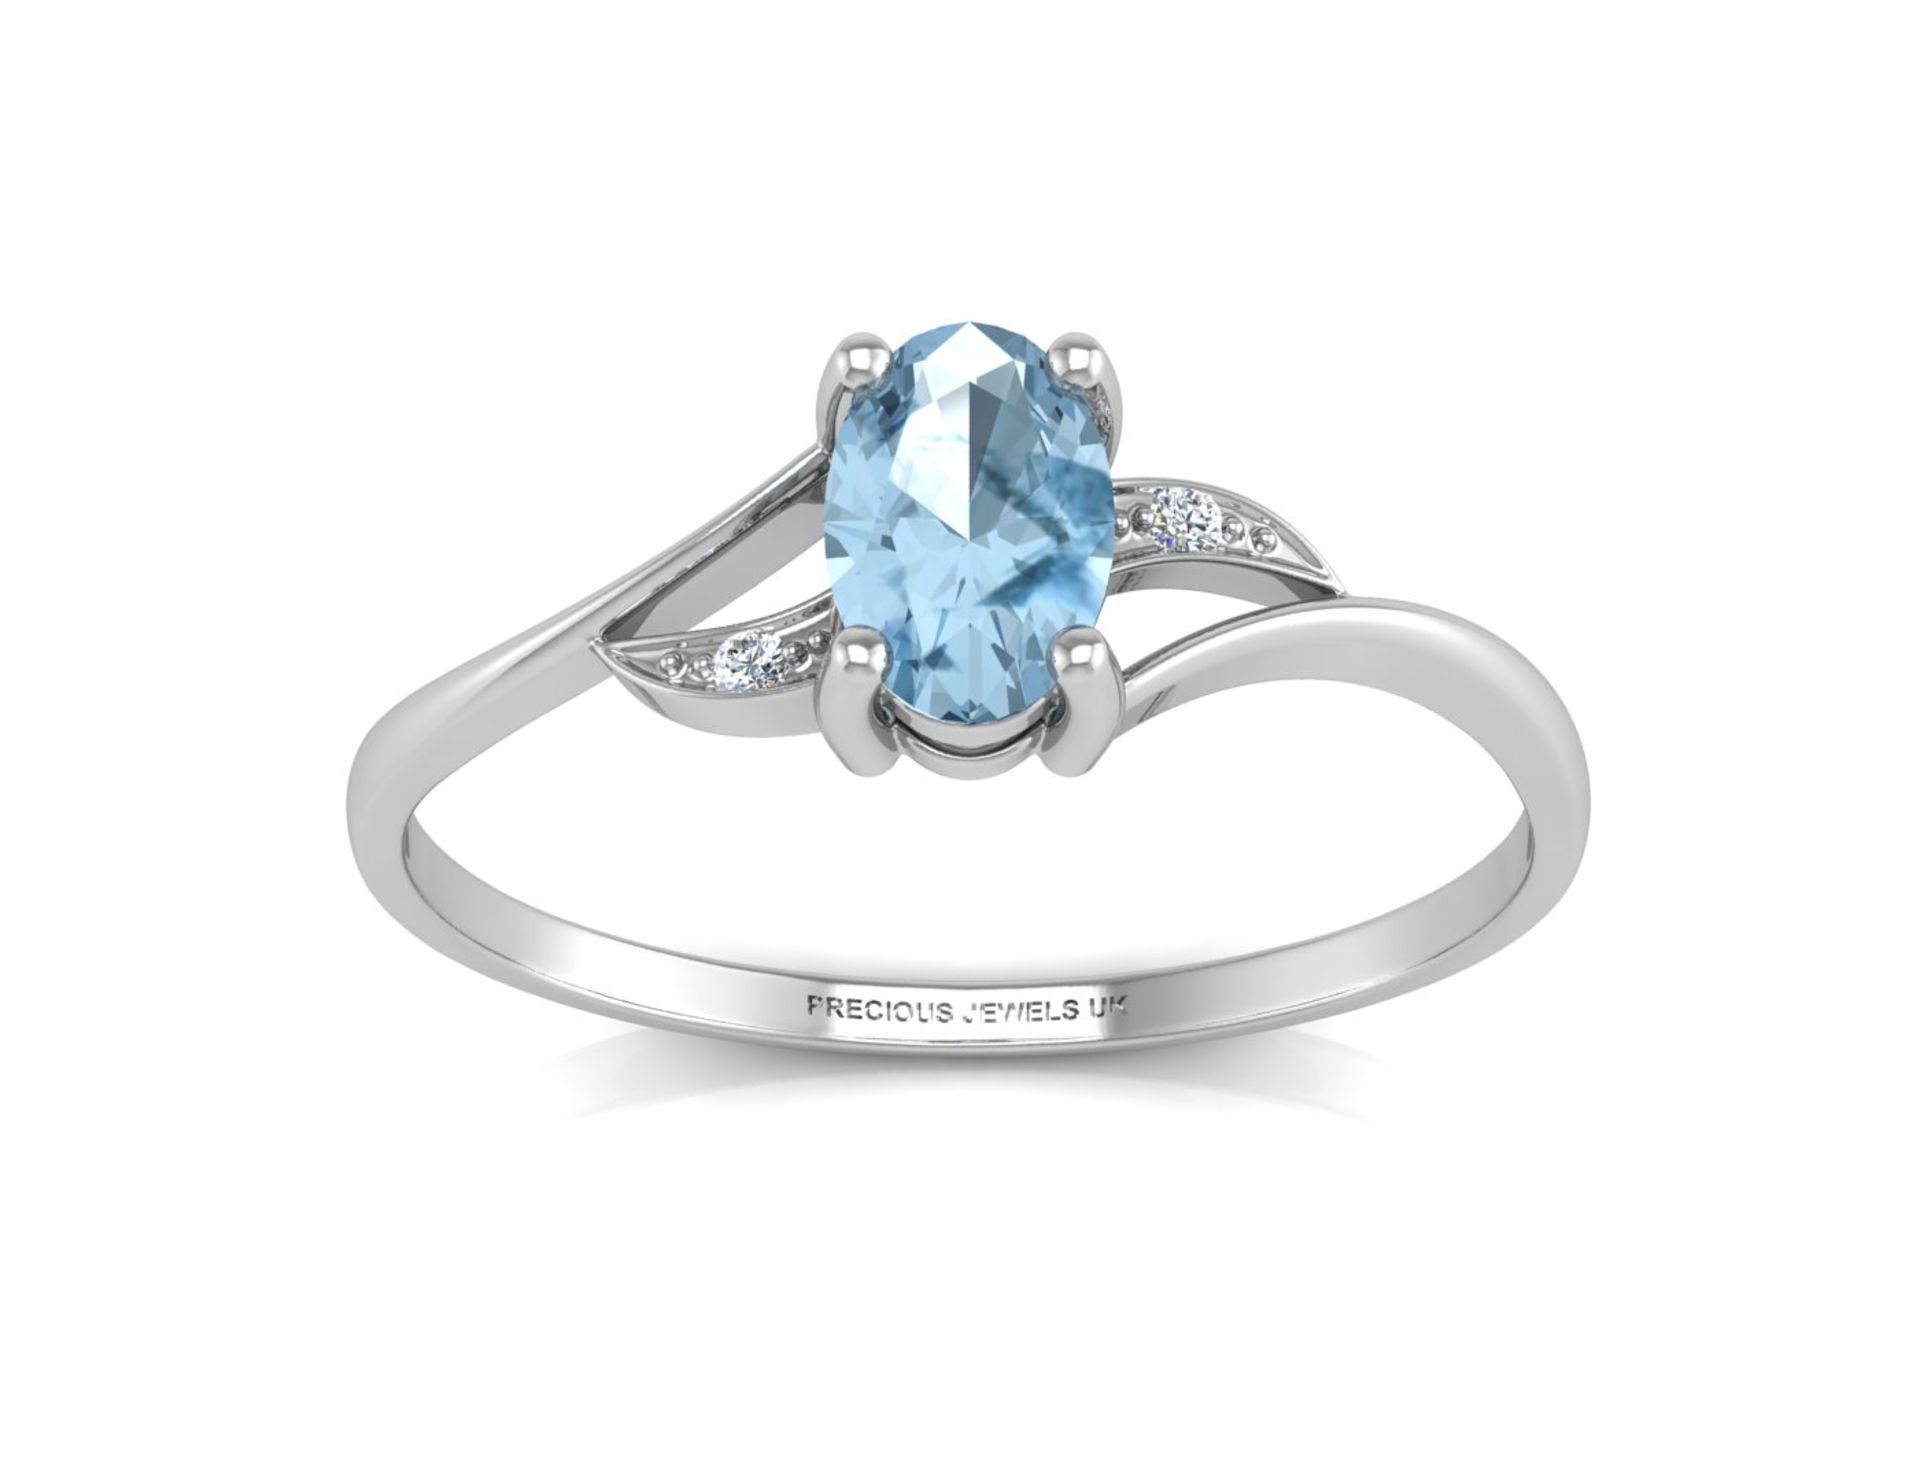 ***£745.00*** UNUSED - Certified by GIE 9ct White Gold Diamond And Blue Topaz Ring 0.01 Carats, - Image 3 of 5